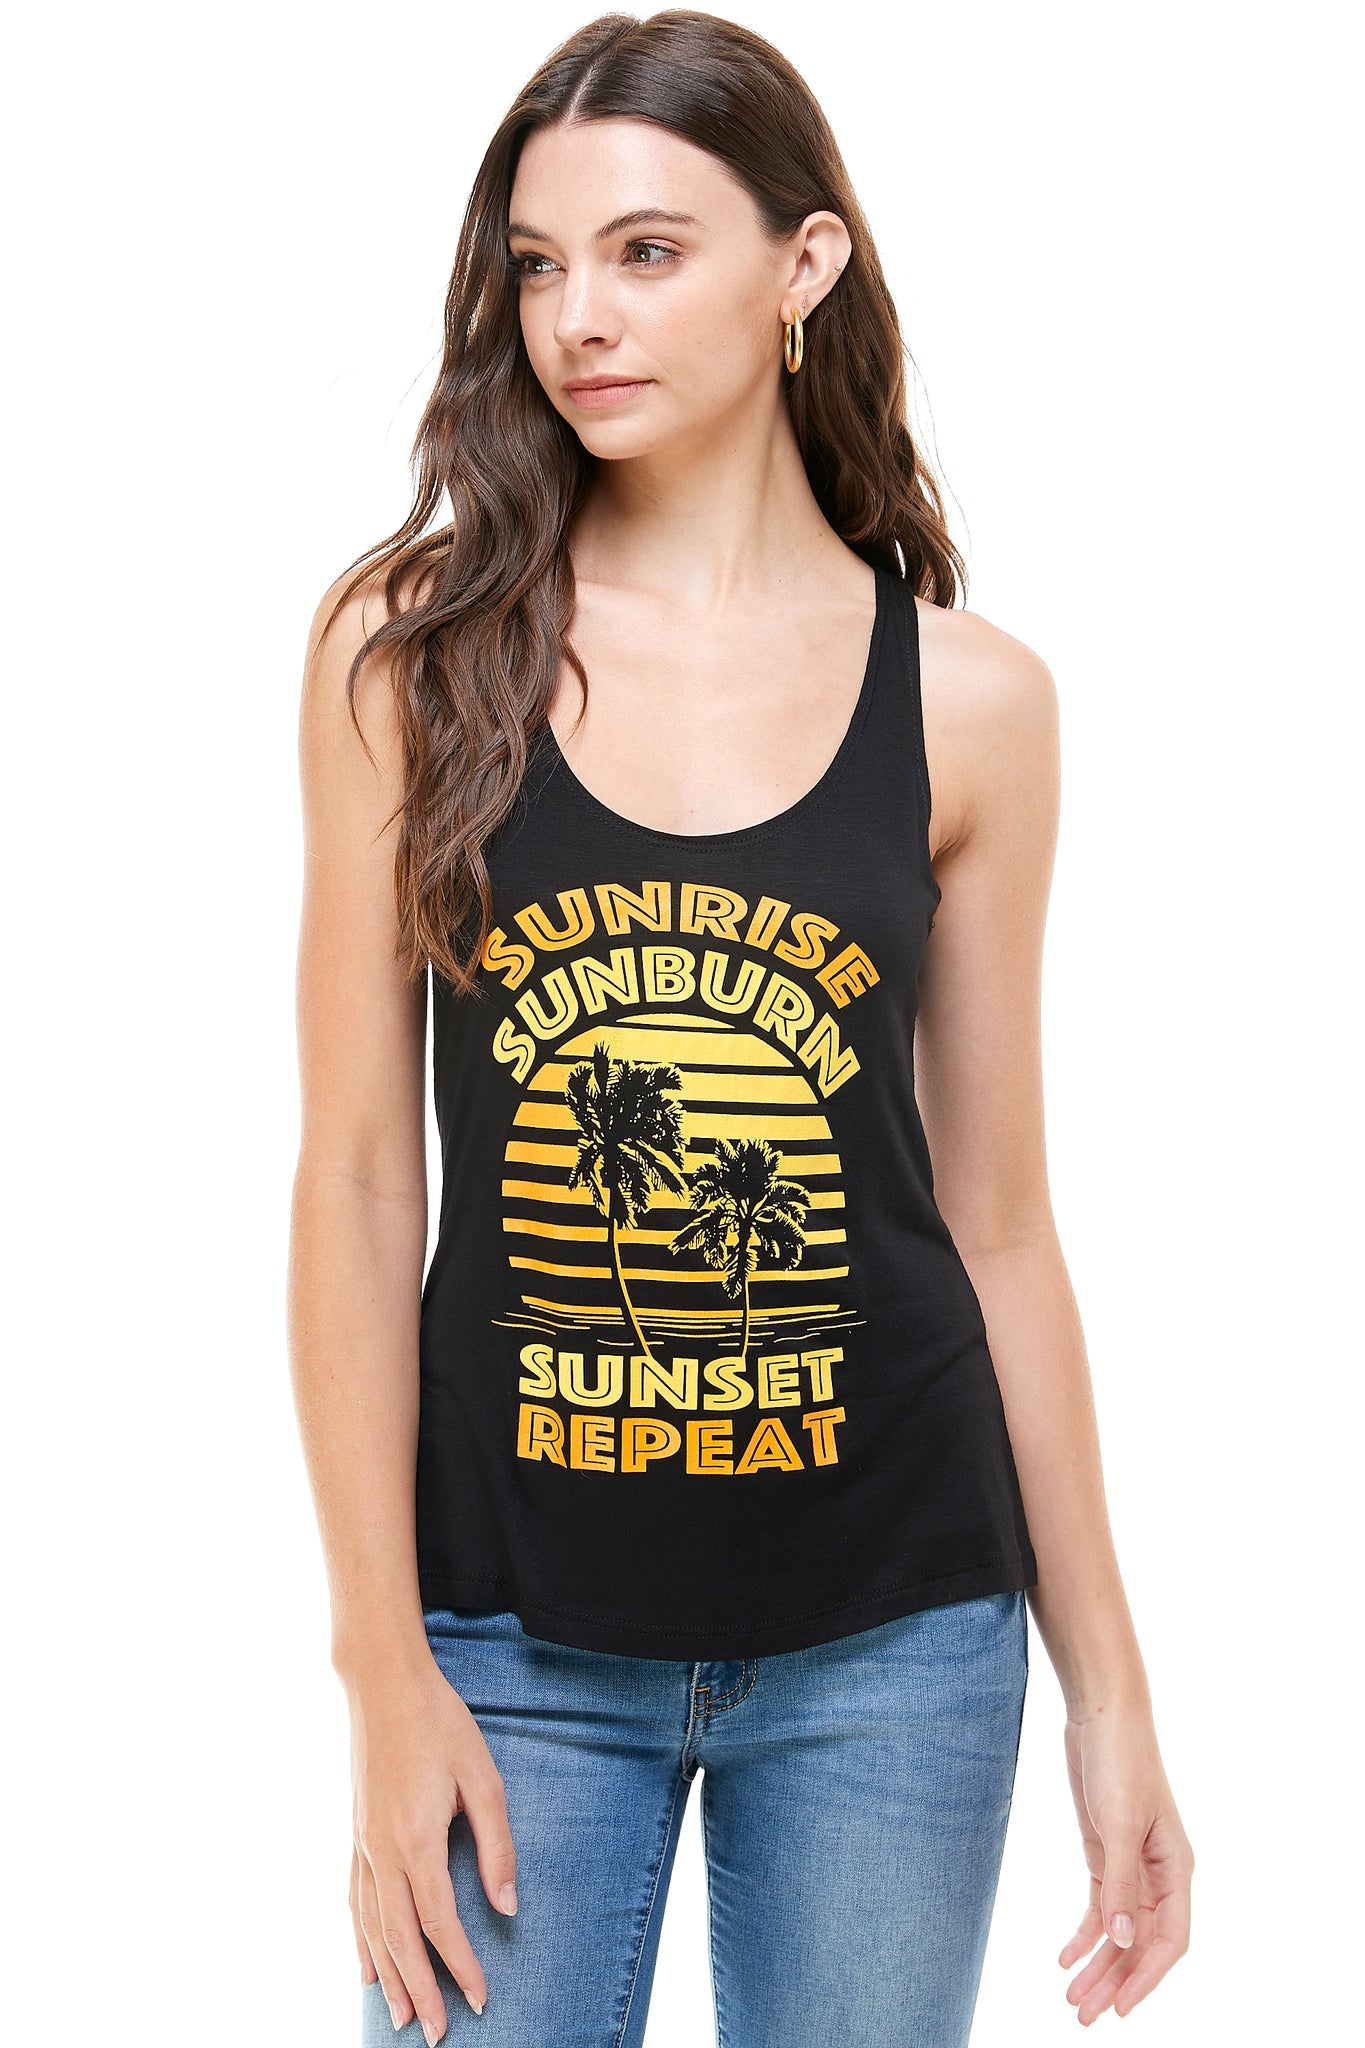 Sunrise Sunburn Sunset Repeat Tank - and, ATTITUDE, COUNTRY, countrystrong, COWGIRL, drinking, flag, GIRL, HOWDY, lips, love, moonshine, music, patriotic, peace, PLUS, rock, rocker, RODEO, roll, shine, SIZE, strong, SUMMER, TANK, TOP, WESTERN - Shirts & Tops - Baha Ranch Western Wear